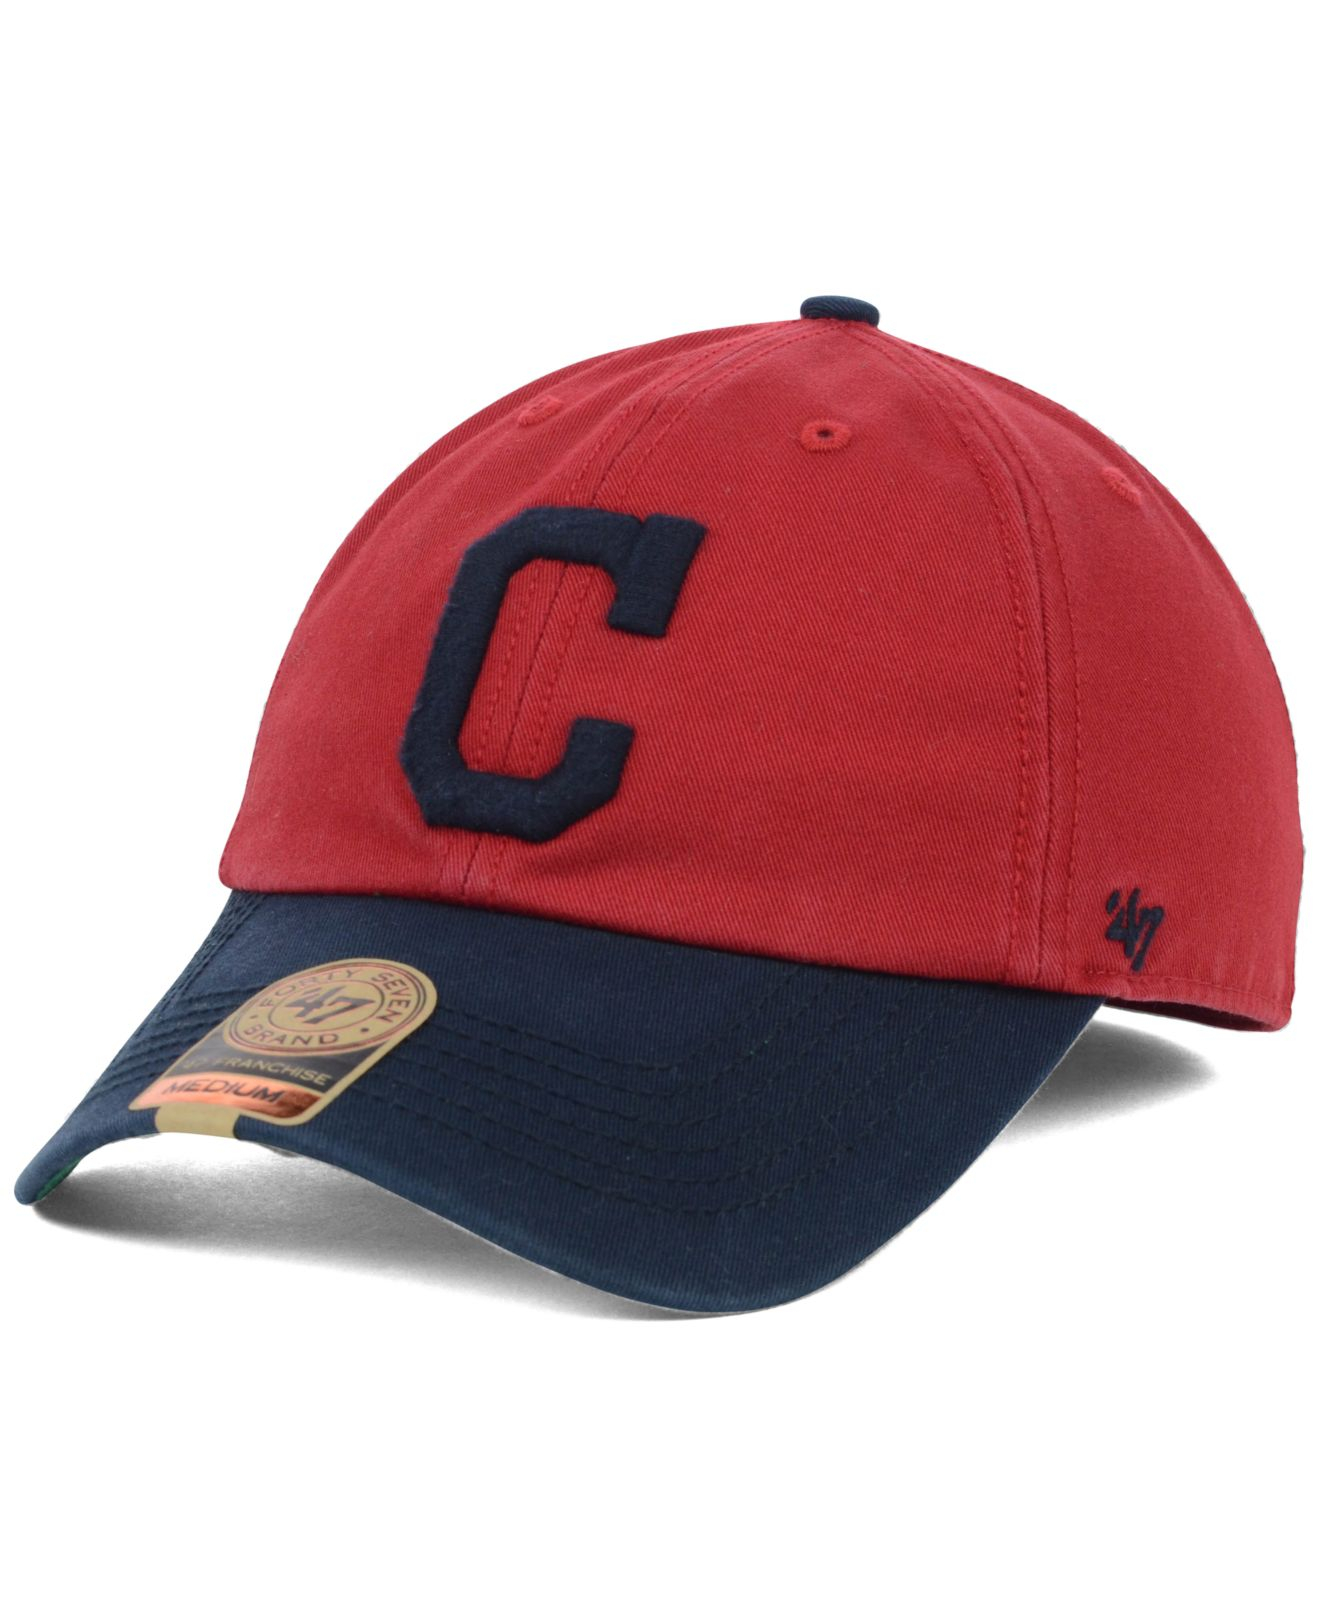 Lyst - 47 Brand Cleveland Indians Bp Franchise Cap in Red